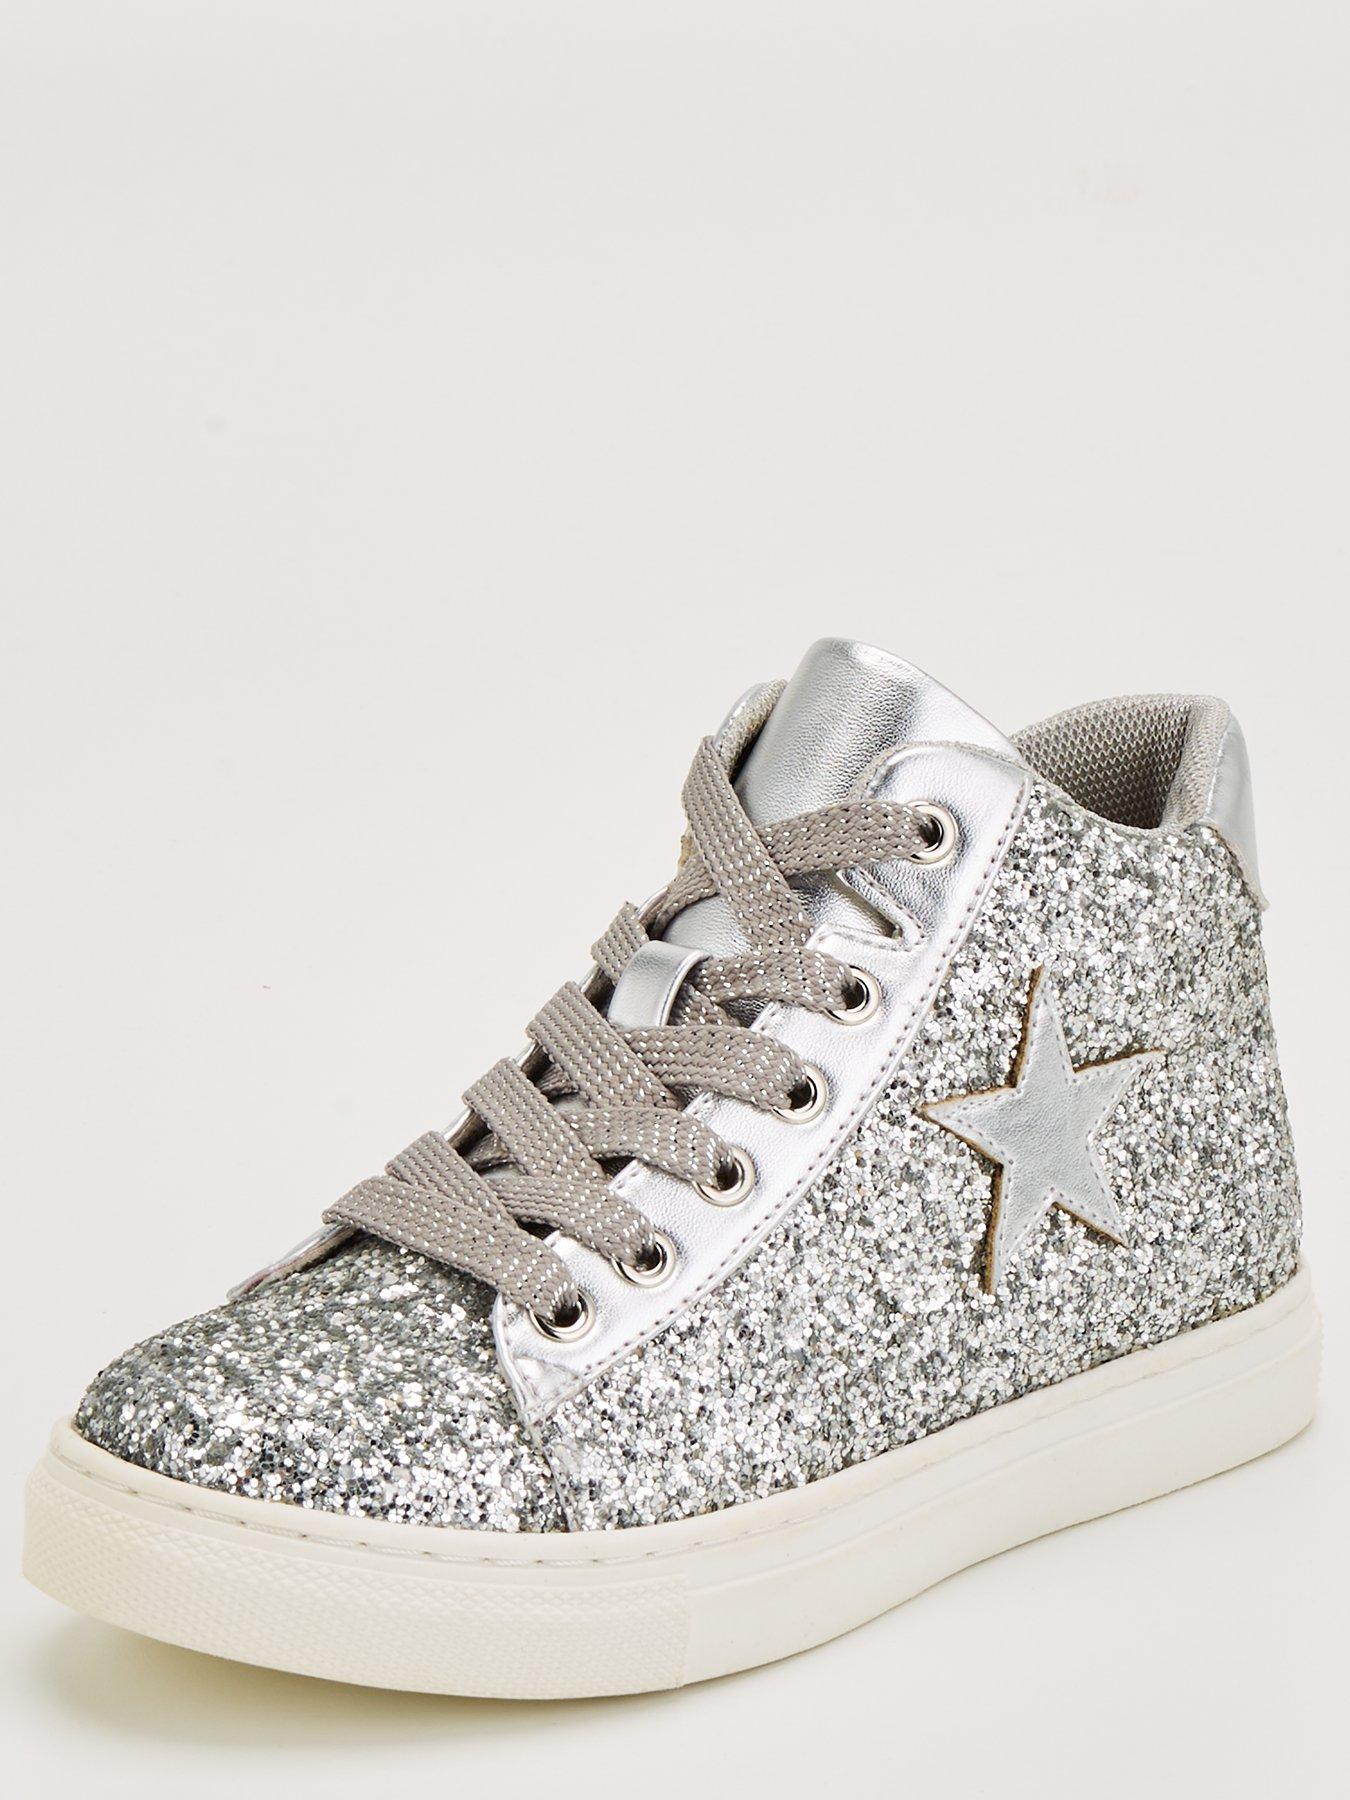 V by Very Girls Hi Top Trainer | very.co.uk